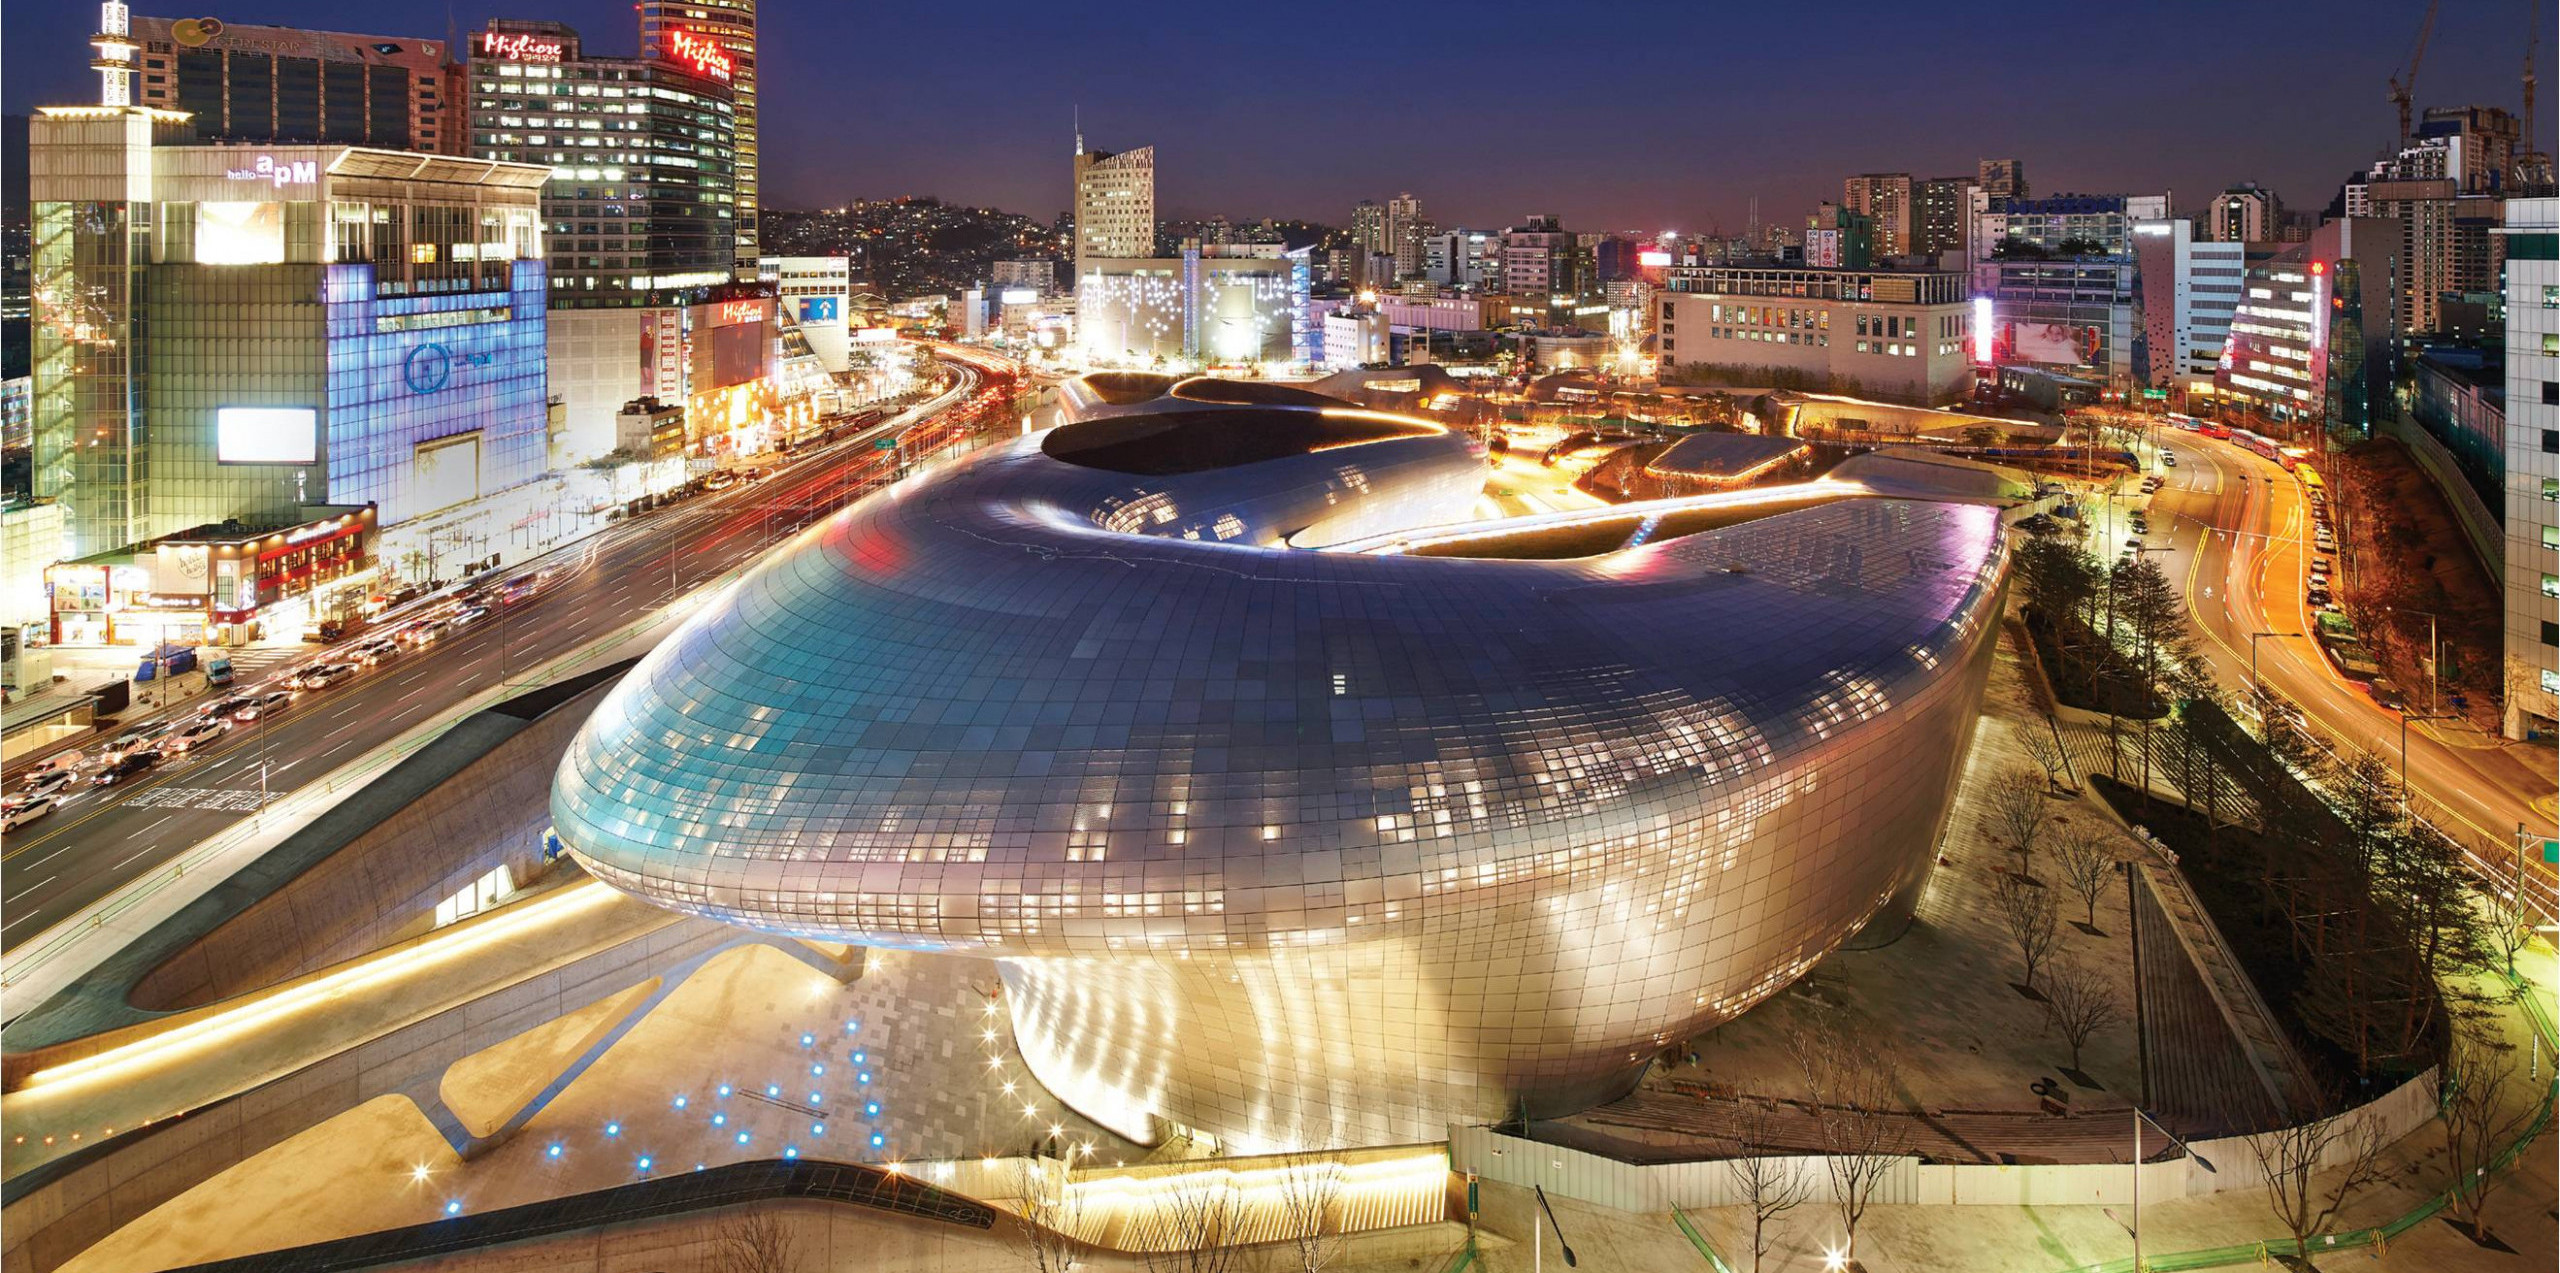 Dongdaemun Design Plaza is one of Korea’s most recognizable free-form structures.